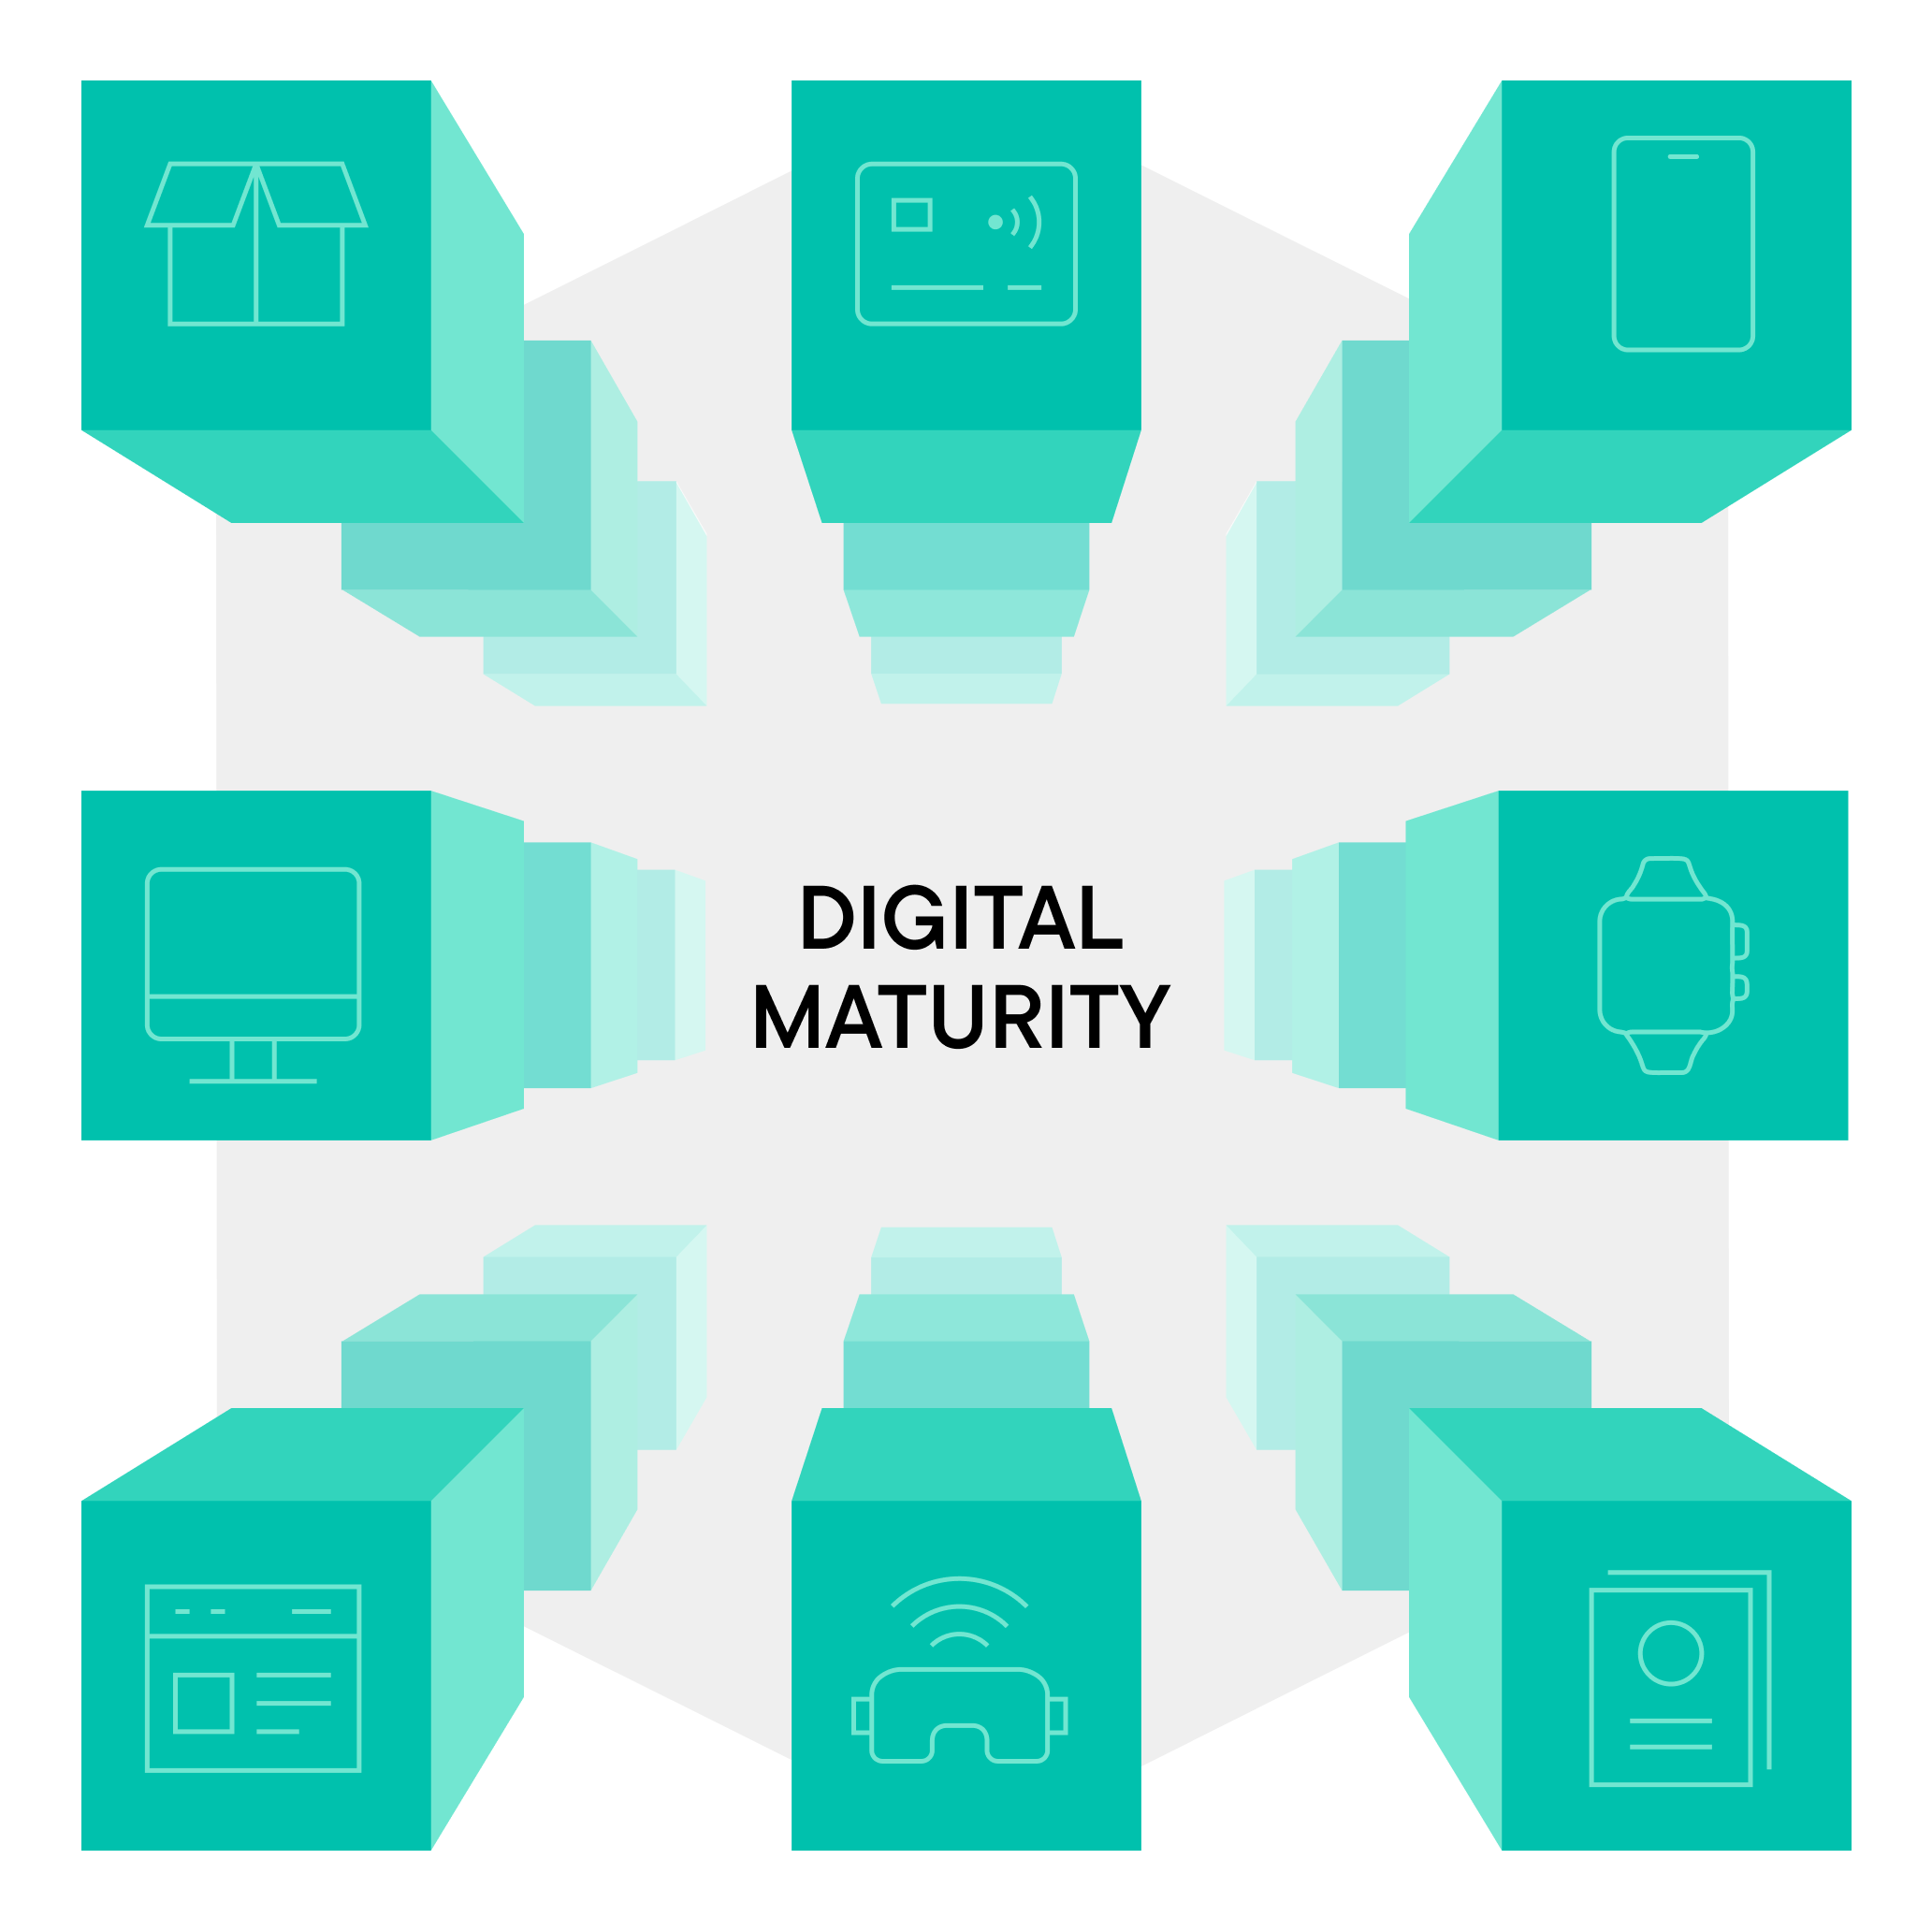 How to focus investments and energy to evolve your digital maturity